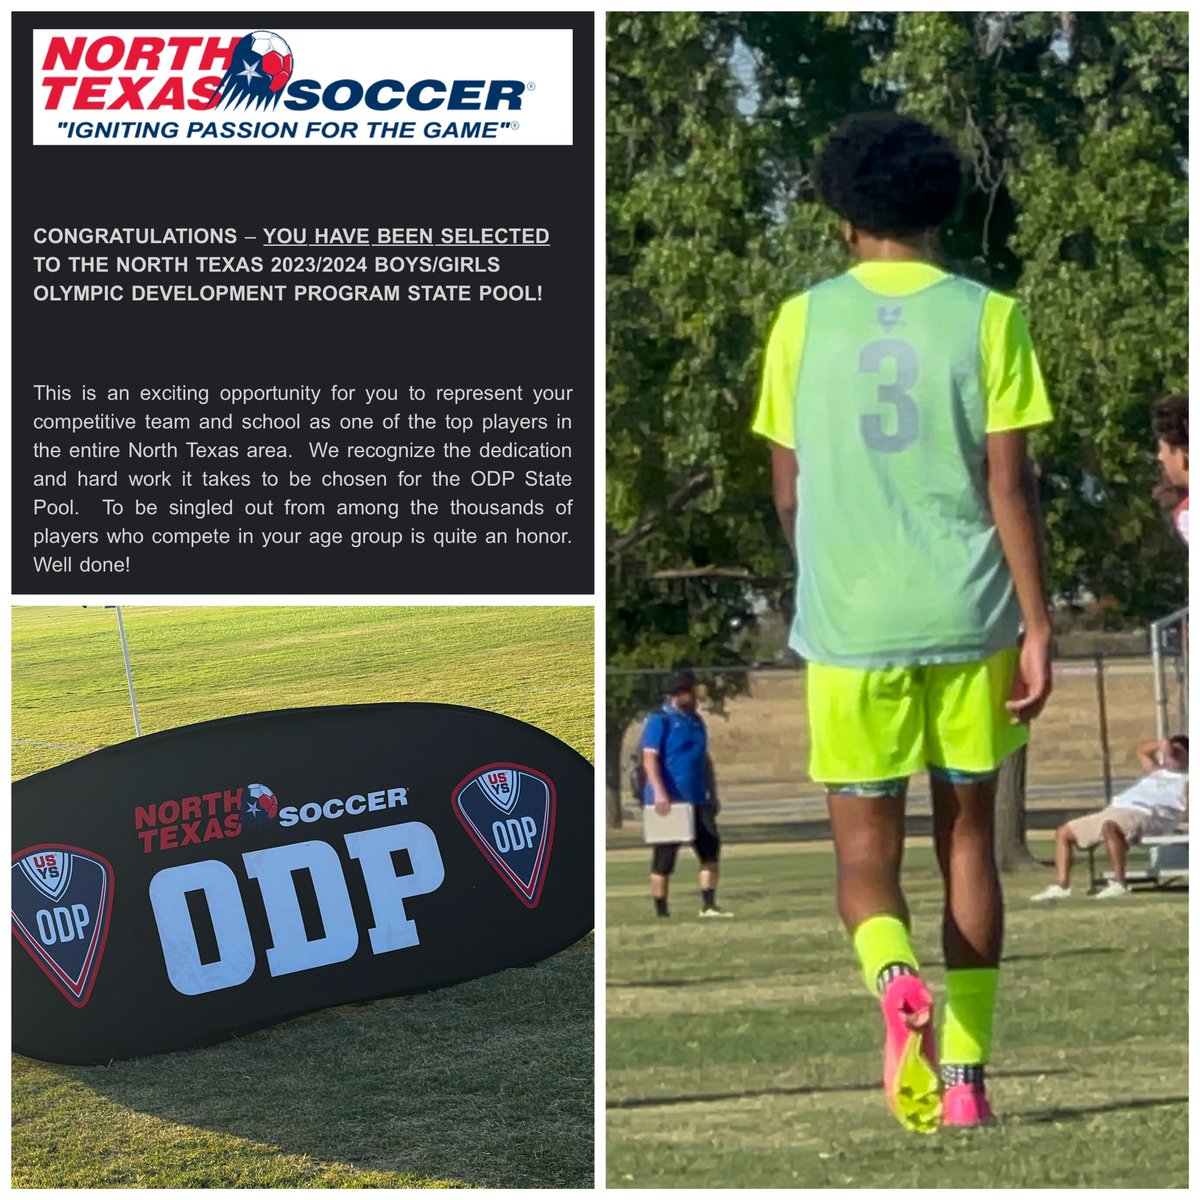 Round 2…Let’s Go!

@NTXODP @usysodp 

@Coyotes_Soccer @Coyotes_Ath @HHSCoyotes @HHSRecruiting 

@ImYouthSoccer @ImCollegeSoccer @PrepSoccer @TopDrawerSoccer @TheSoccerWire

#ODP #NextLevelExcellence

@ECNLboys #AlwaysBeMore